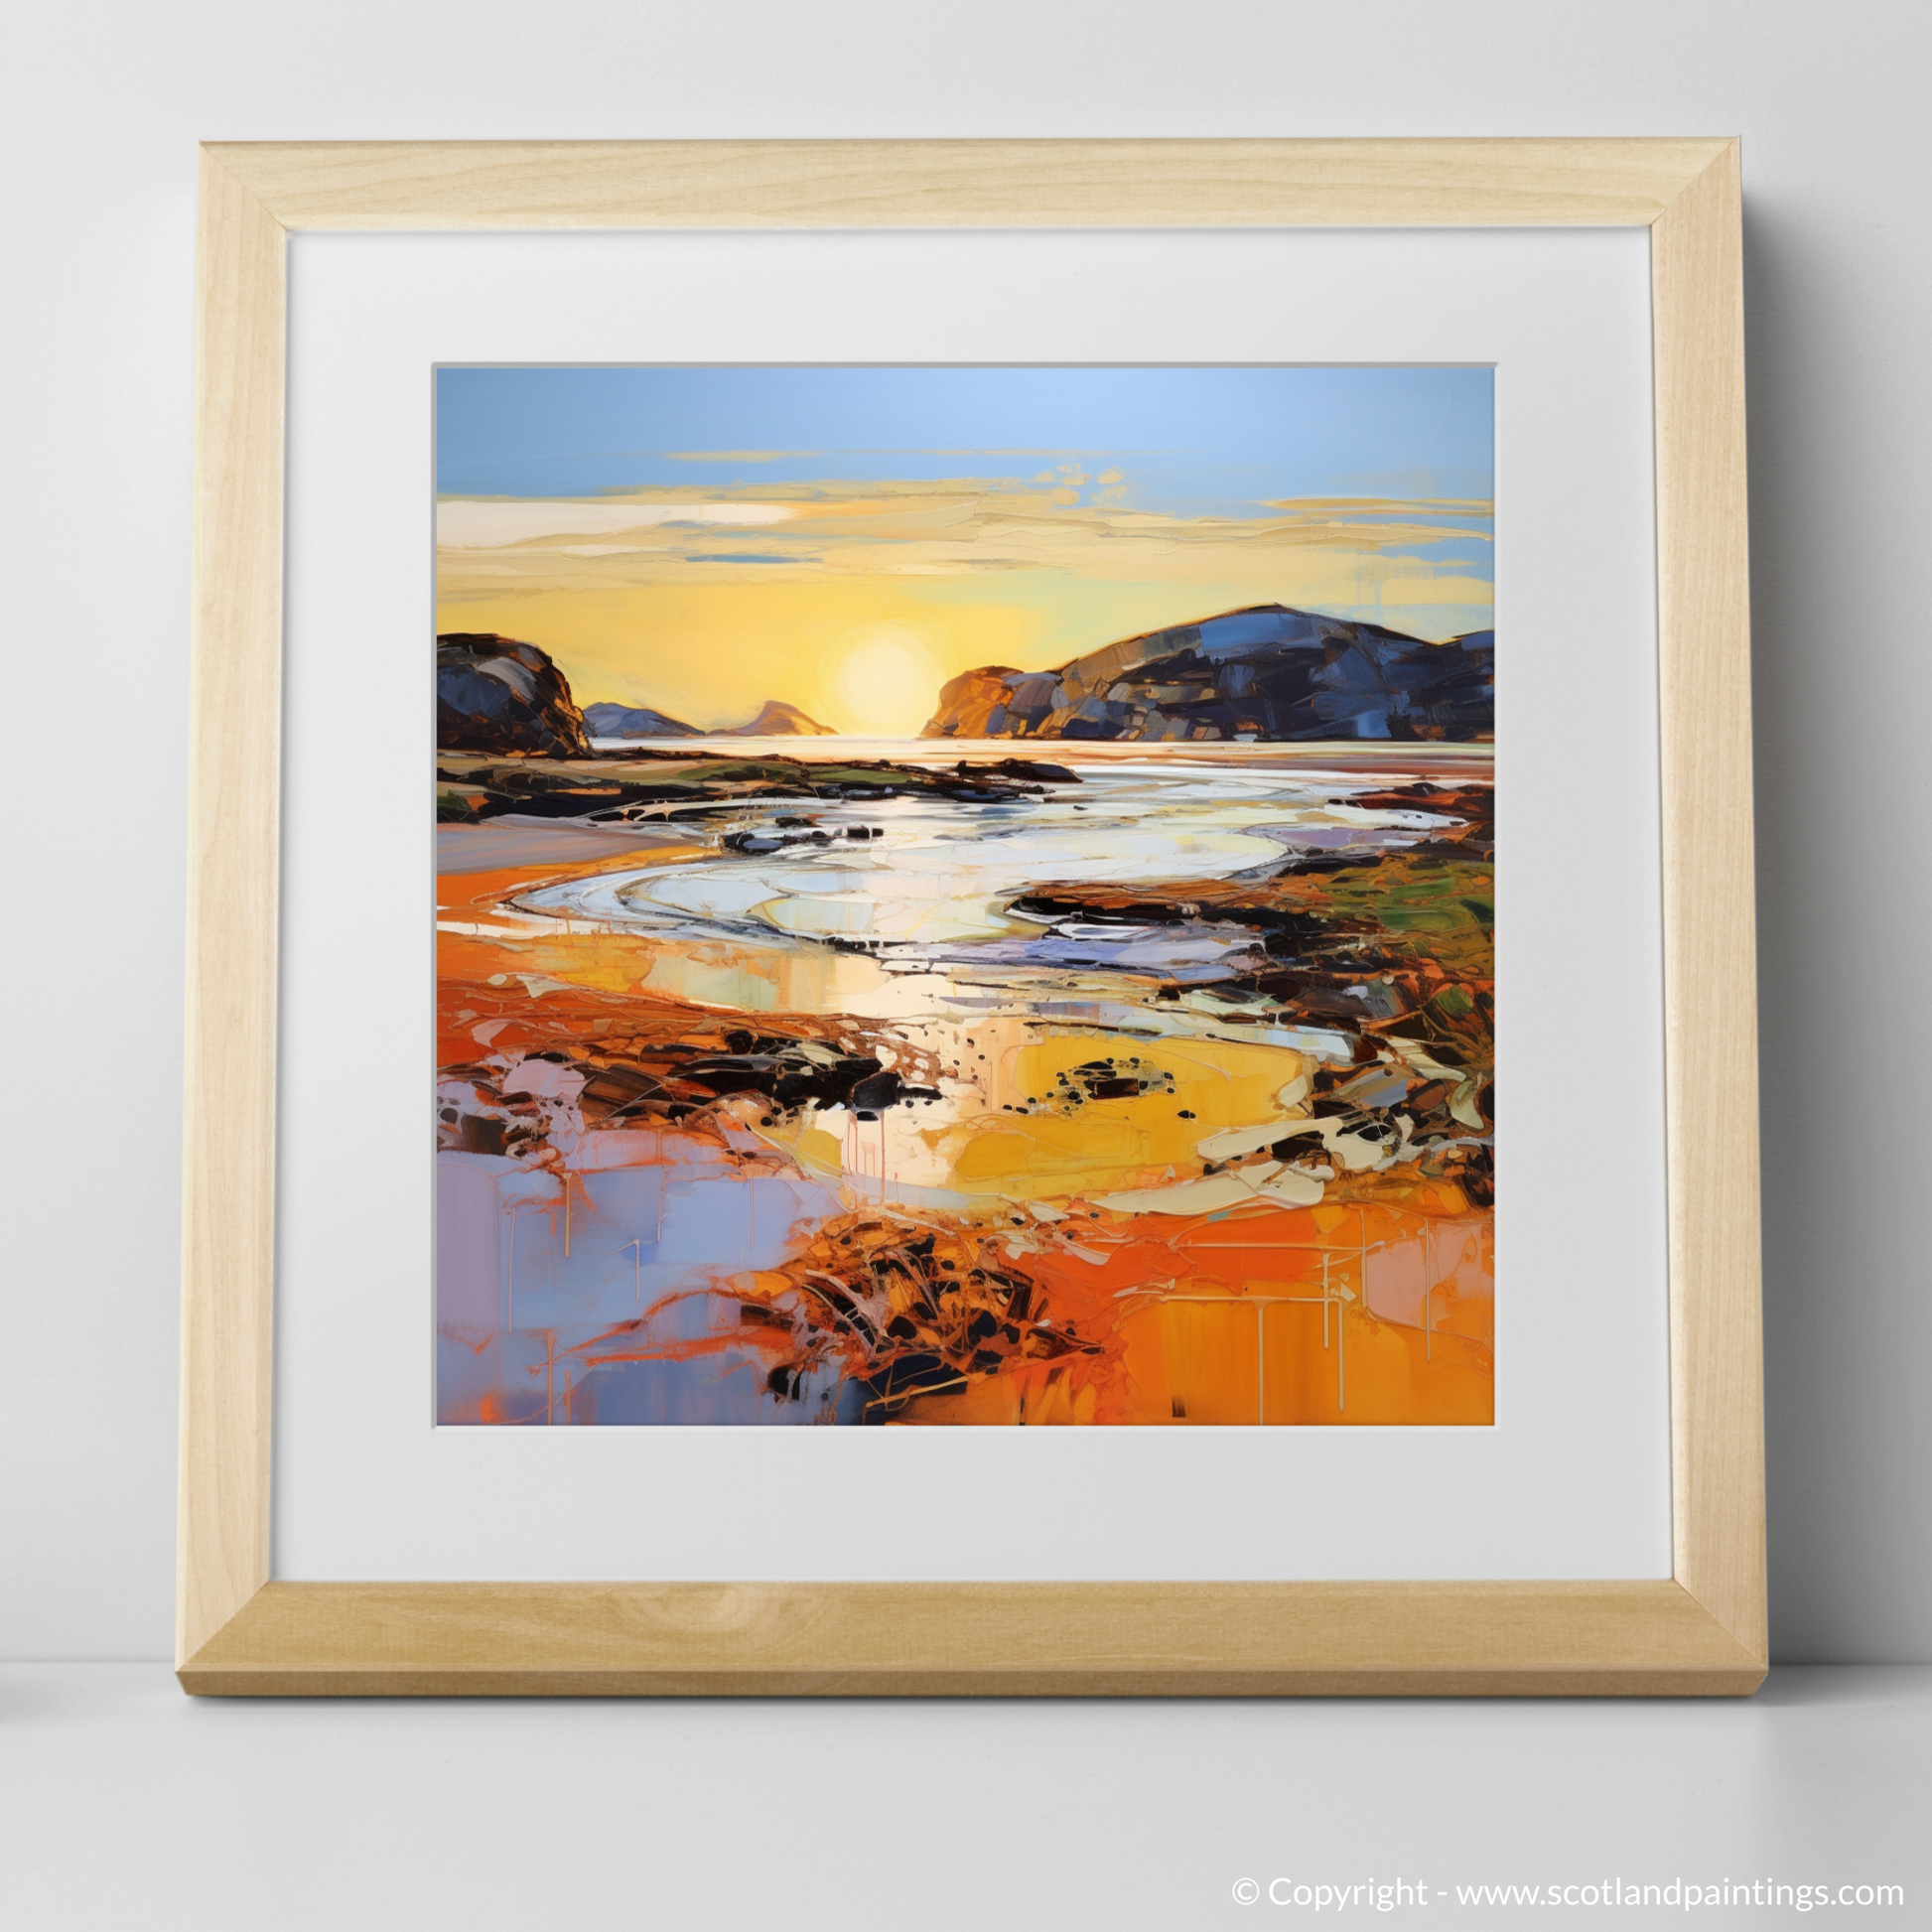 Art Print of Kiloran Bay at golden hour with a natural frame